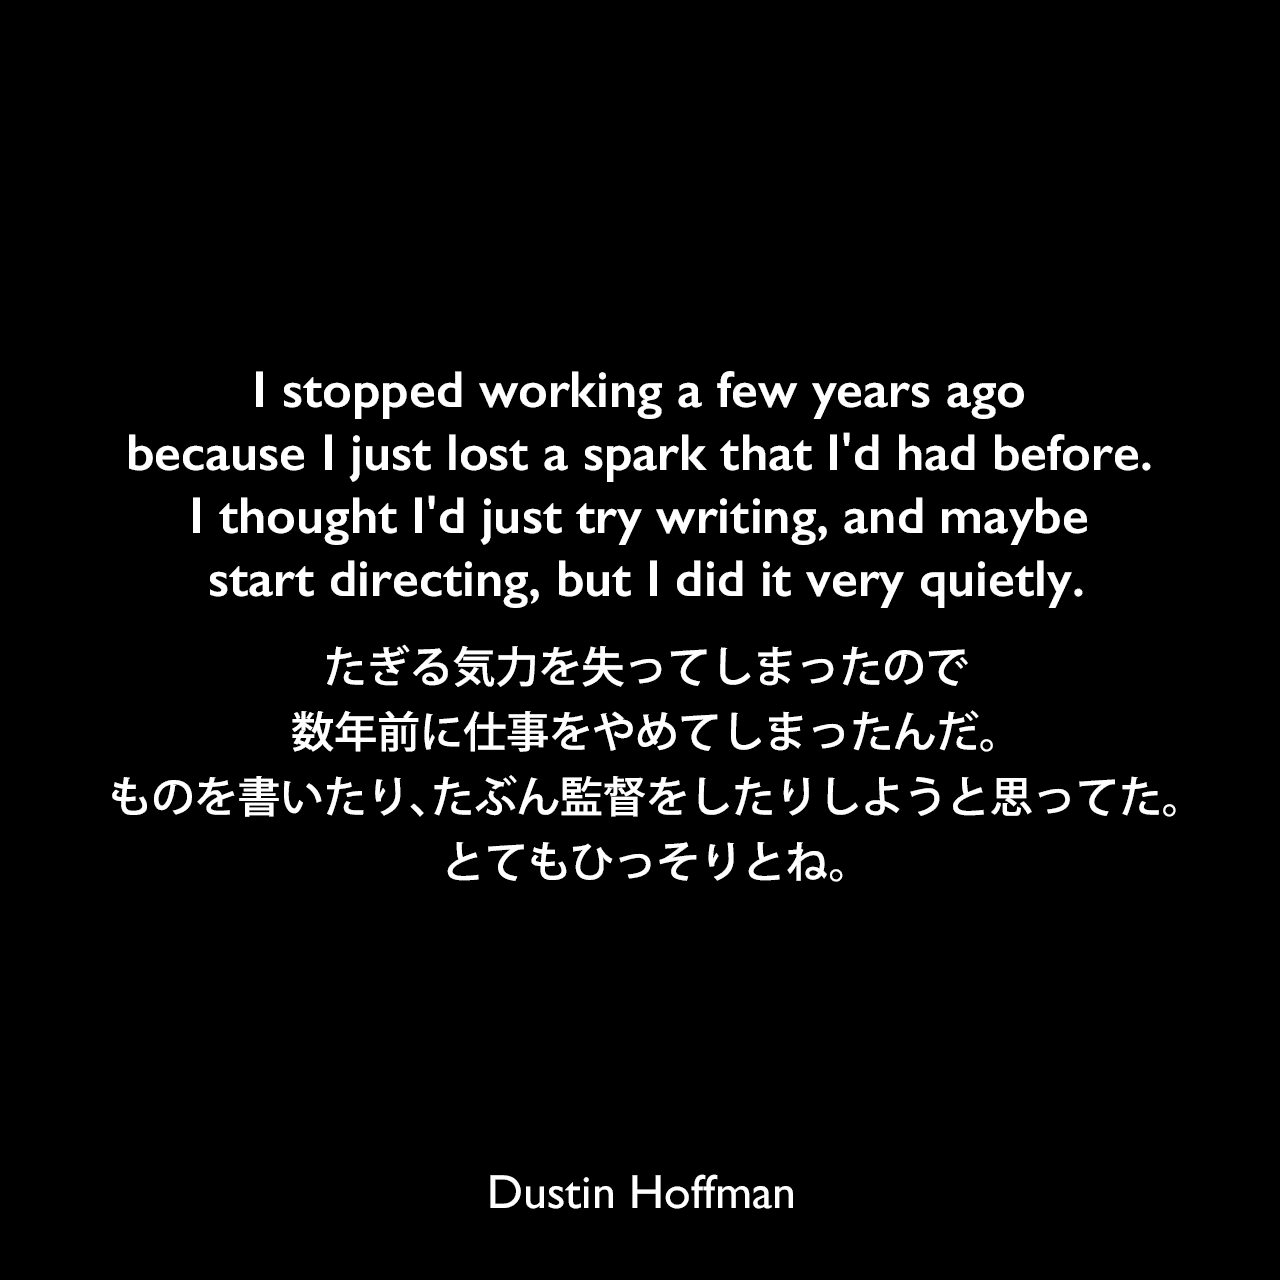 I stopped working a few years ago because I just lost a spark that I'd had before. I thought I'd just try writing, and maybe start directing, but I did it very quietly.たぎる気力を失ってしまったので、数年前に仕事をやめてしまったんだ。ものを書いたり、たぶん監督をしたりしようと思ってた。とてもひっそりとね。Dustin Hoffman